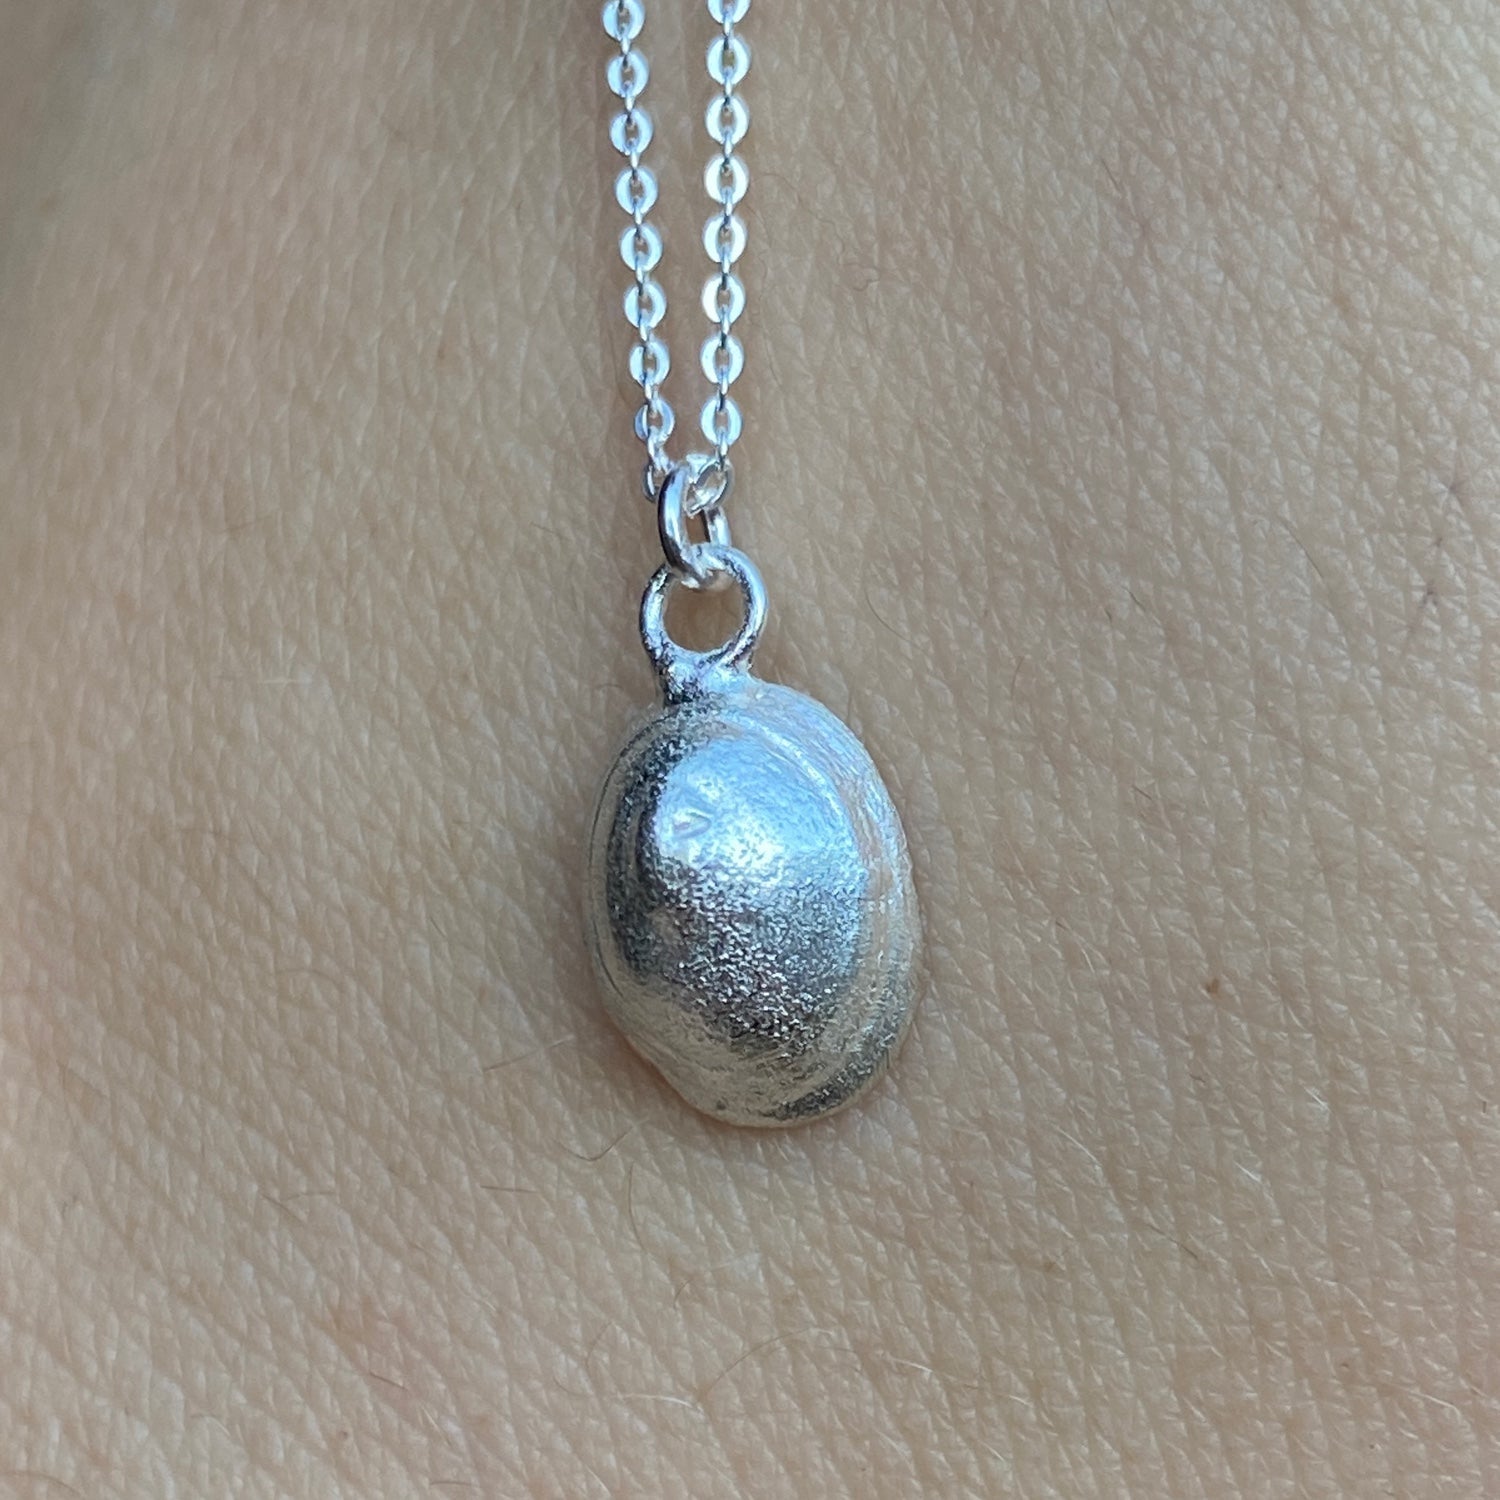 Sterling Silver Limpet Shell Pendant